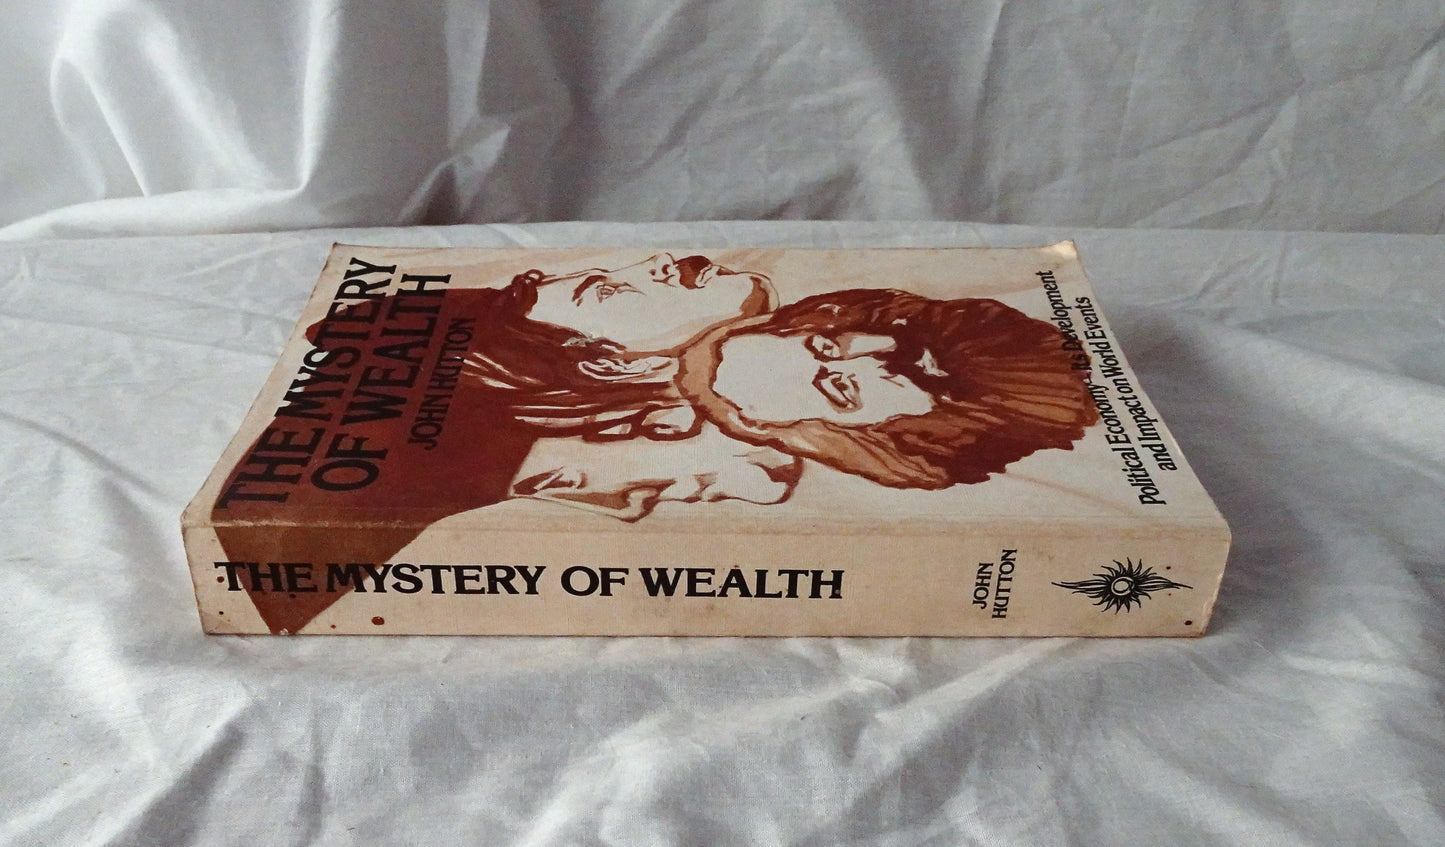 The Mystery of Wealth by John Hutton